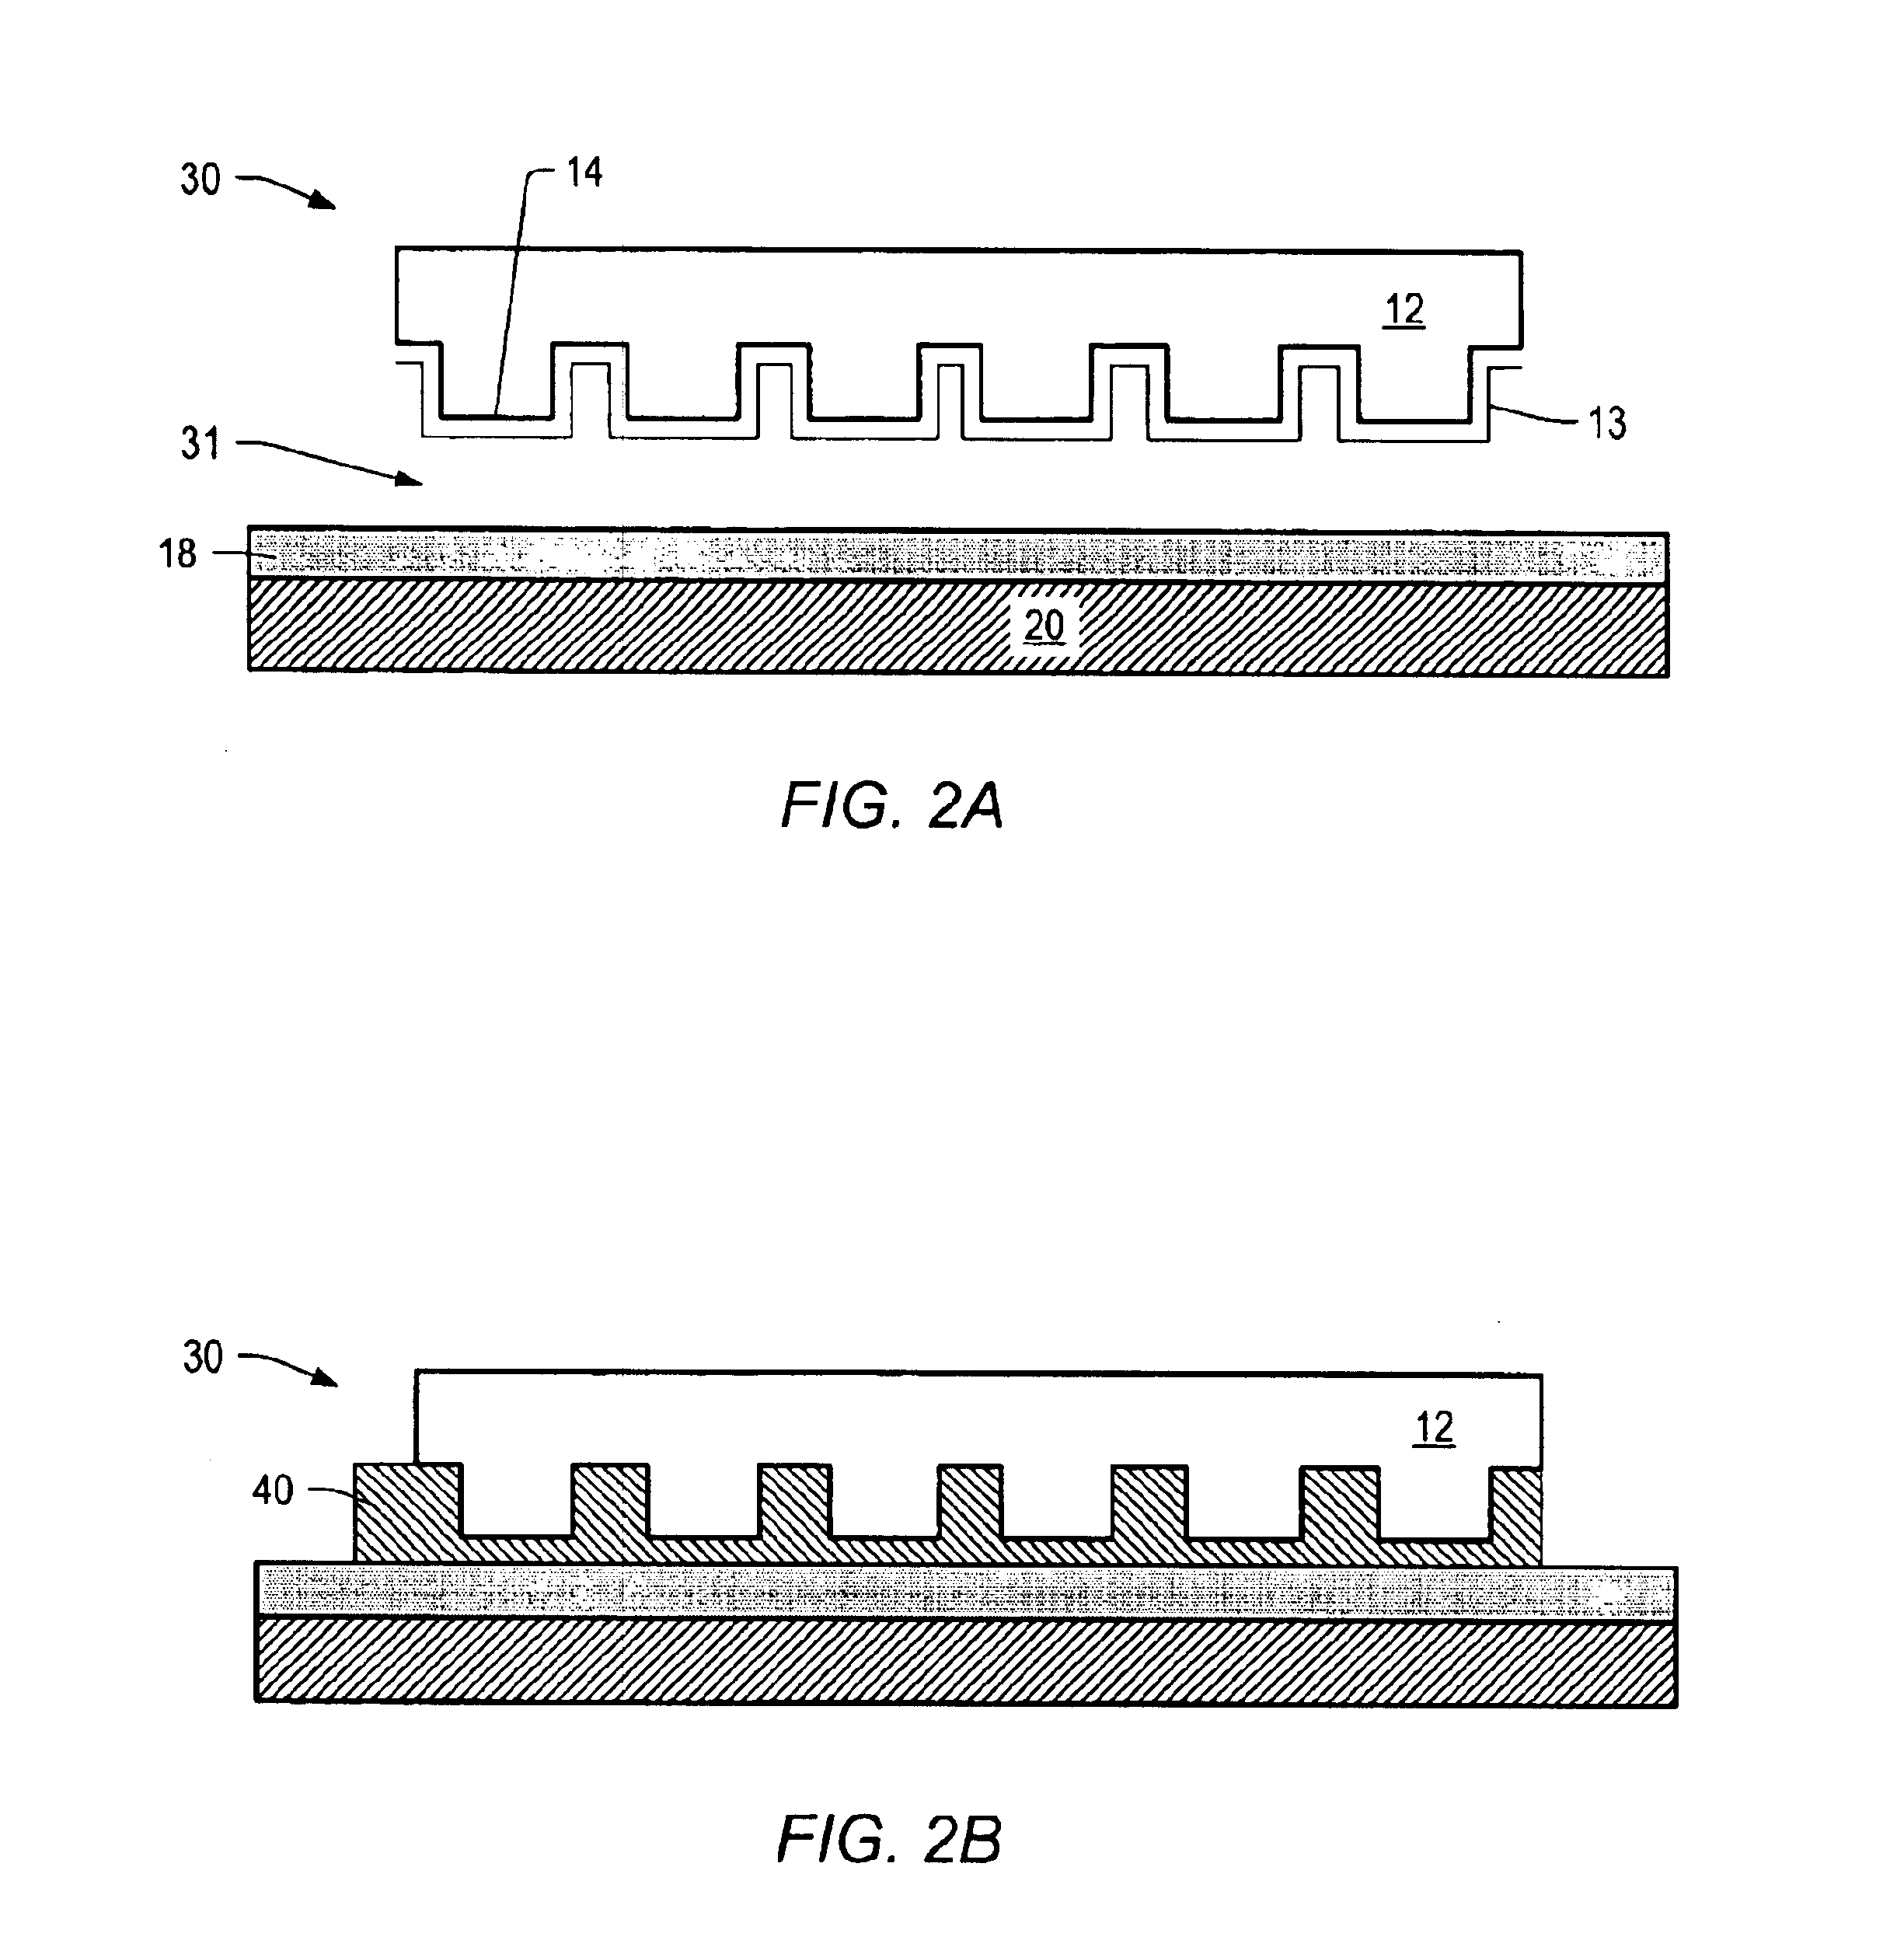 Imprint lithography template comprising alignment marks